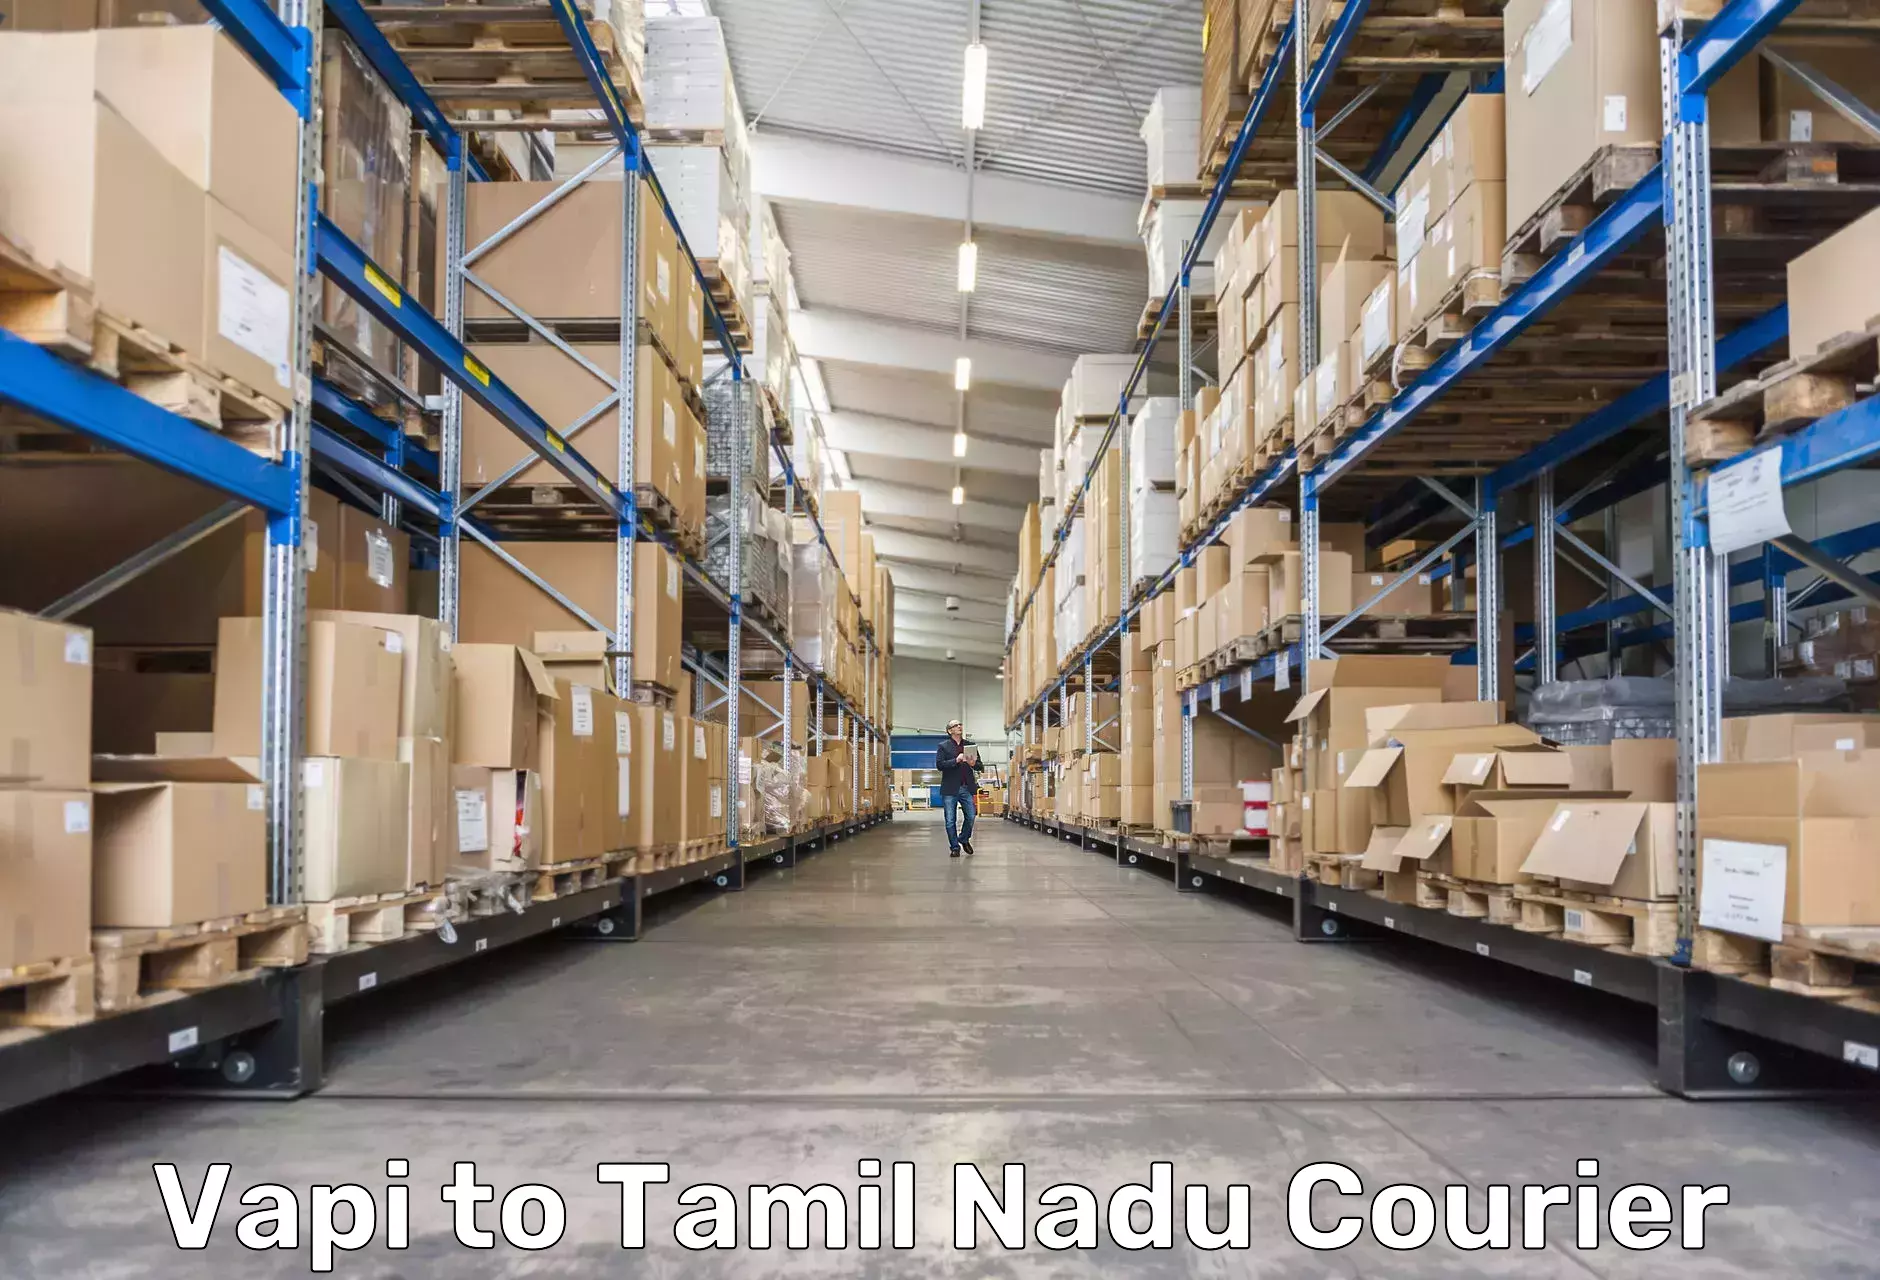 Global courier networks Vapi to Gobichettipalayam